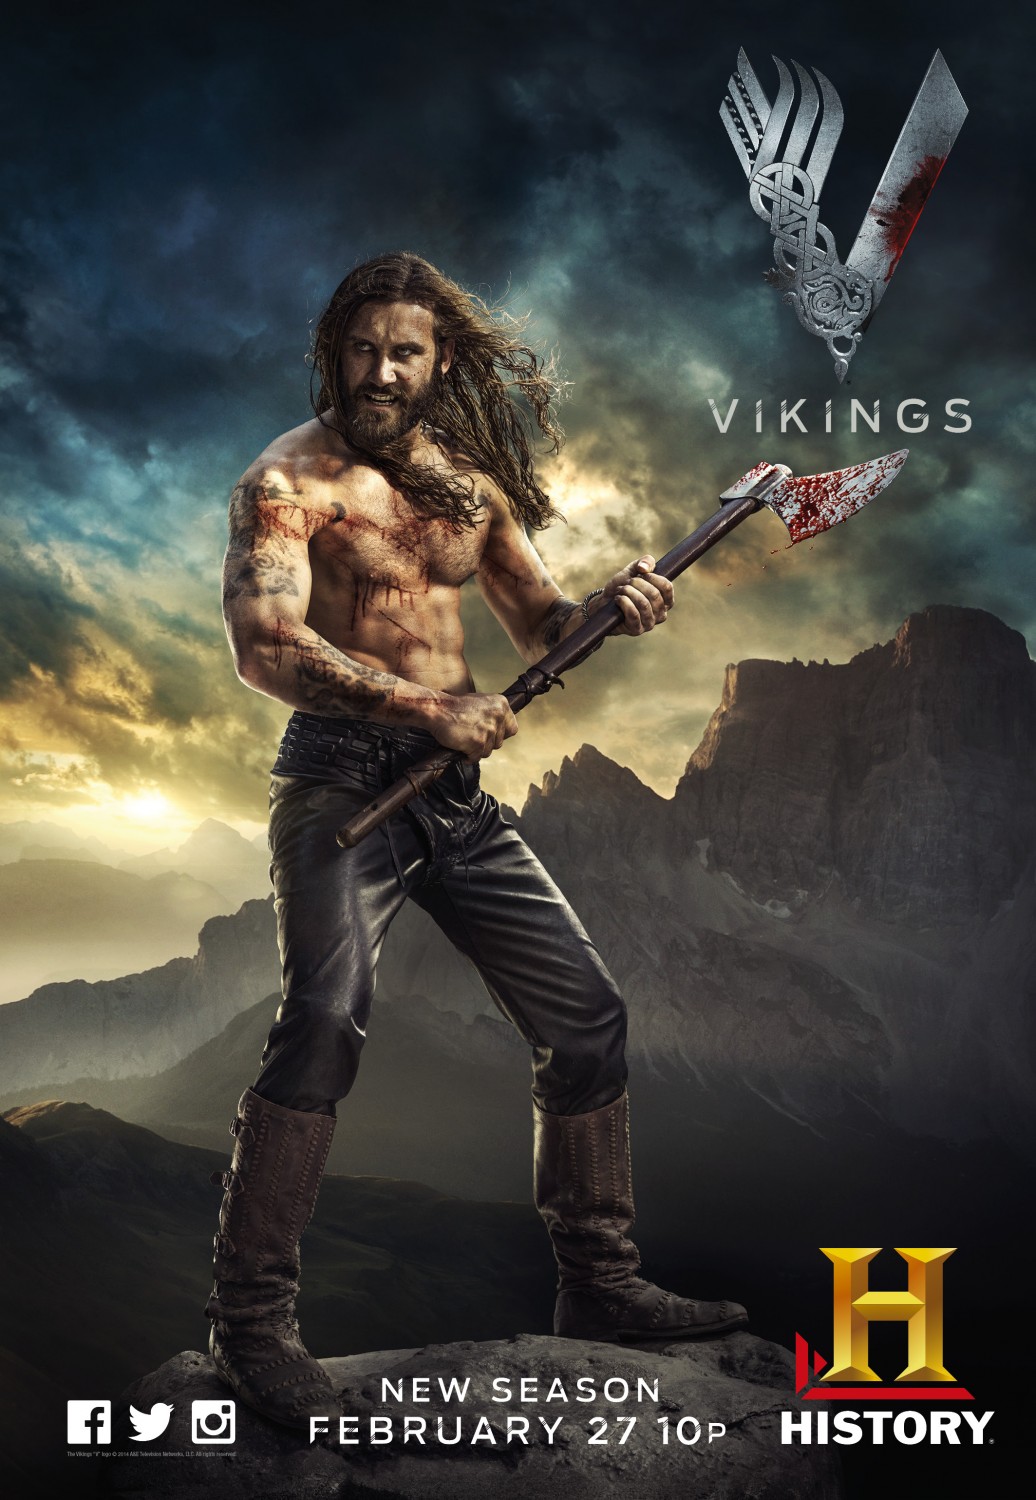 Extra Large TV Poster Image for Vikings (#4 of 30)